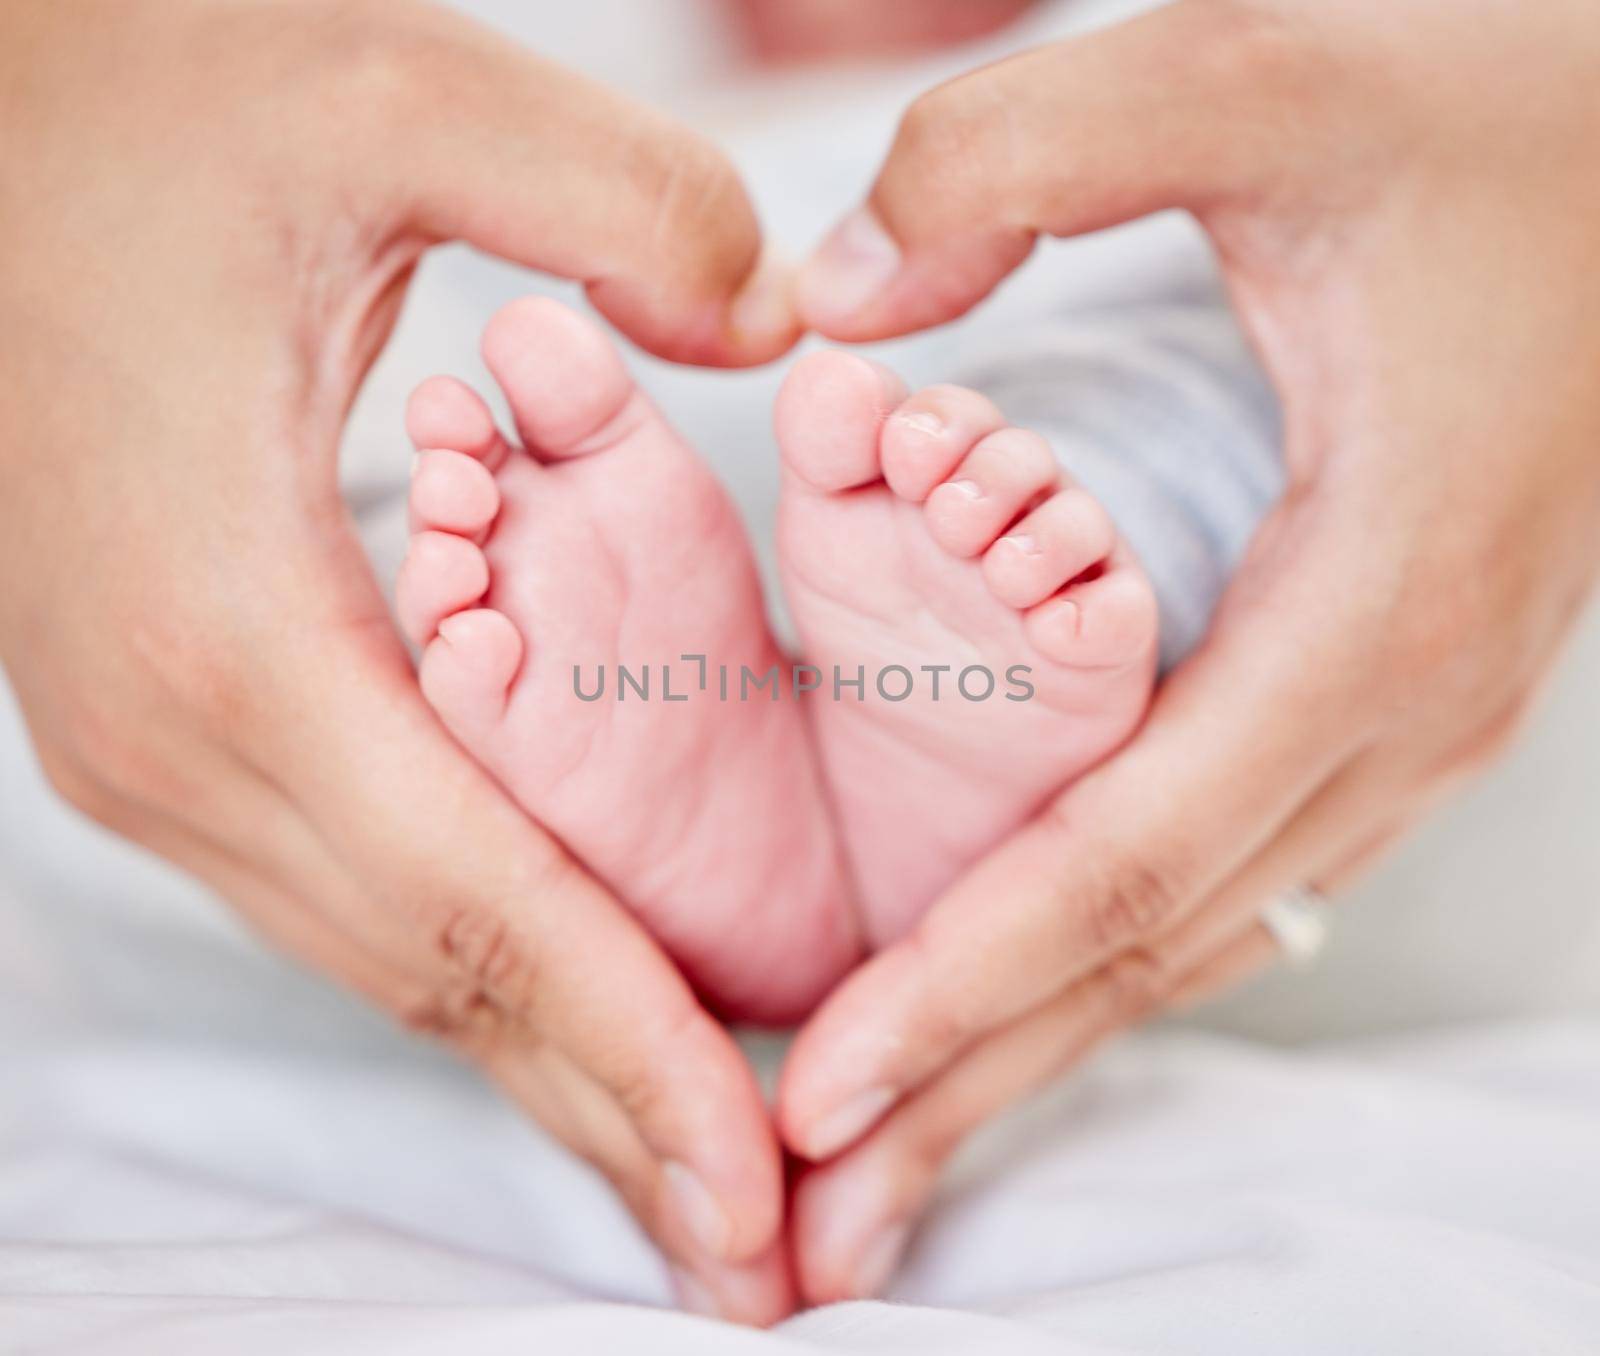 Closeup of hands of a parent forming a heart shape around tiny newborn baby feet. Mother loving her little baby. Small baby resting in its nursery while parent holds its feet